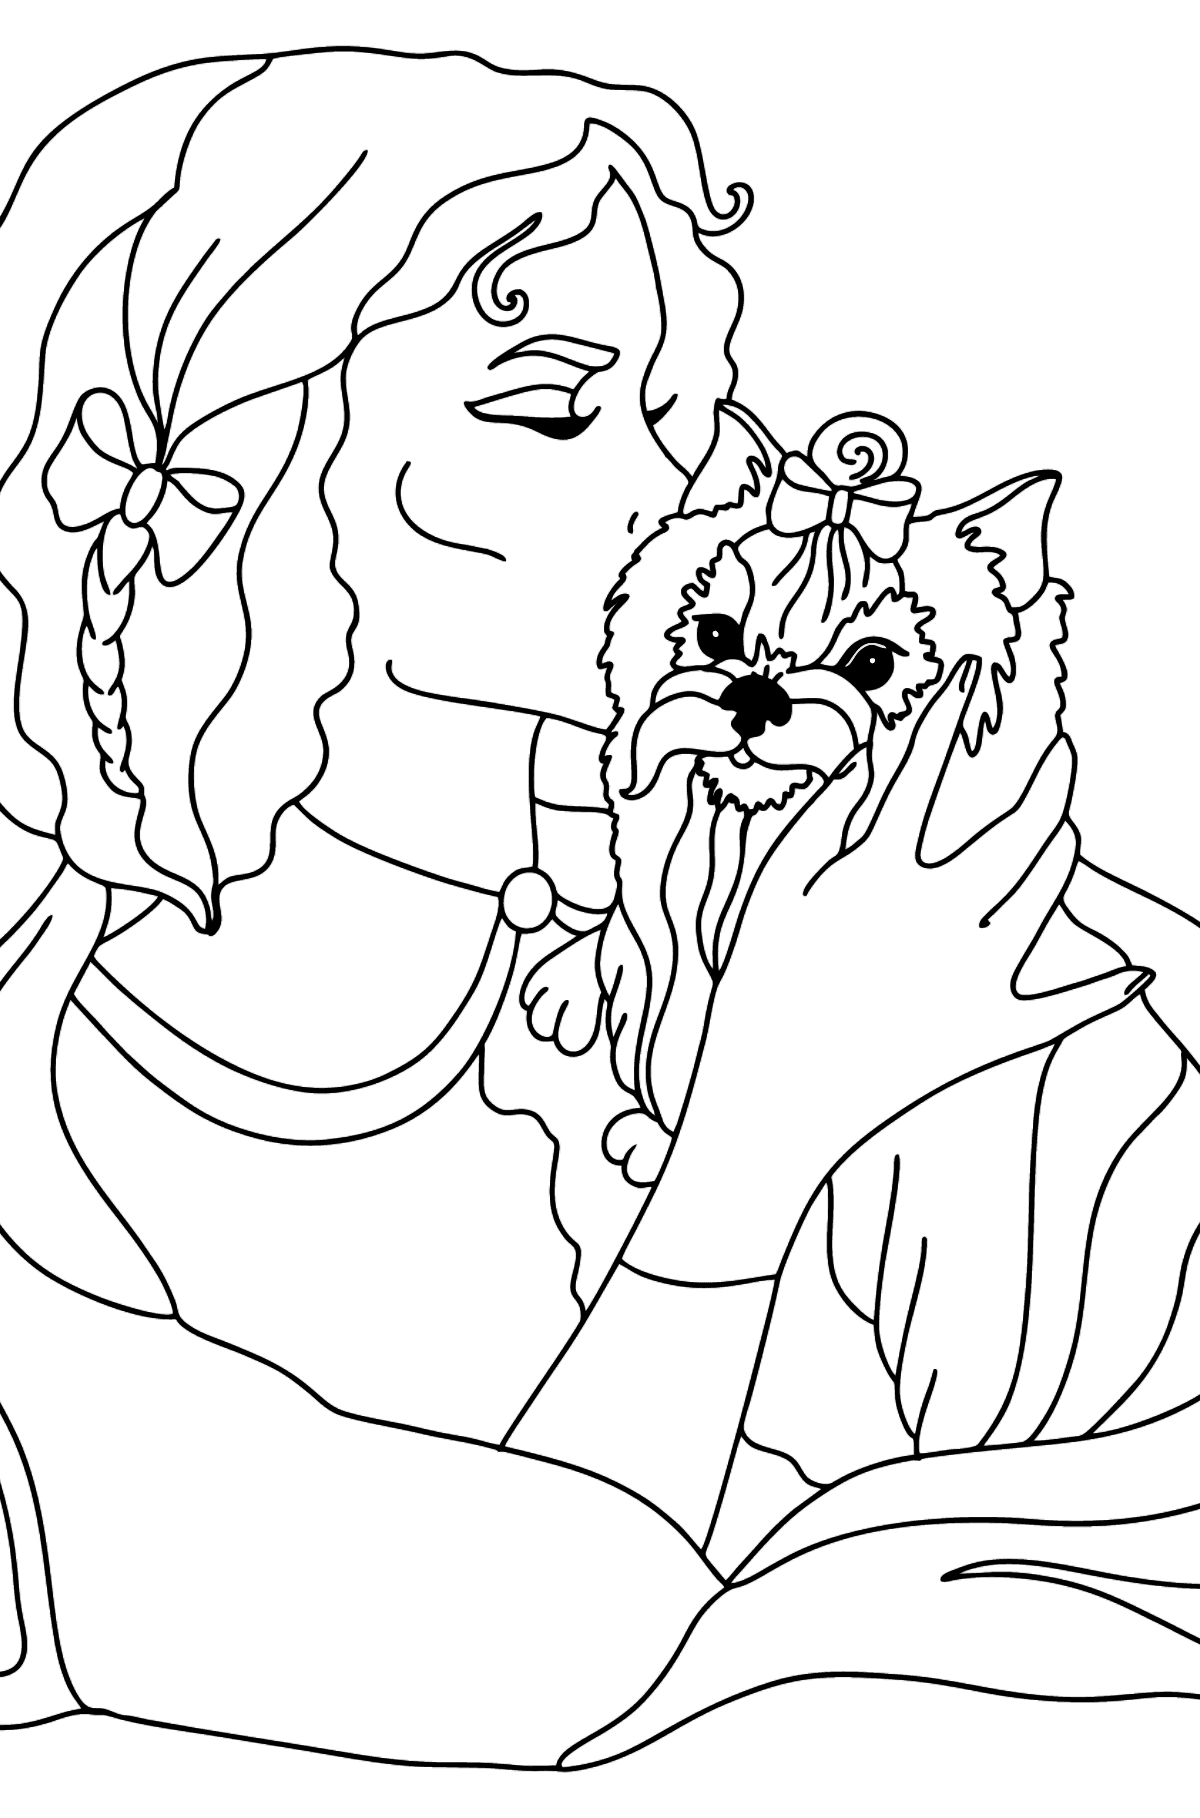 Yorkshire Terrier with Owner coloring page - Coloring Pages for Kids